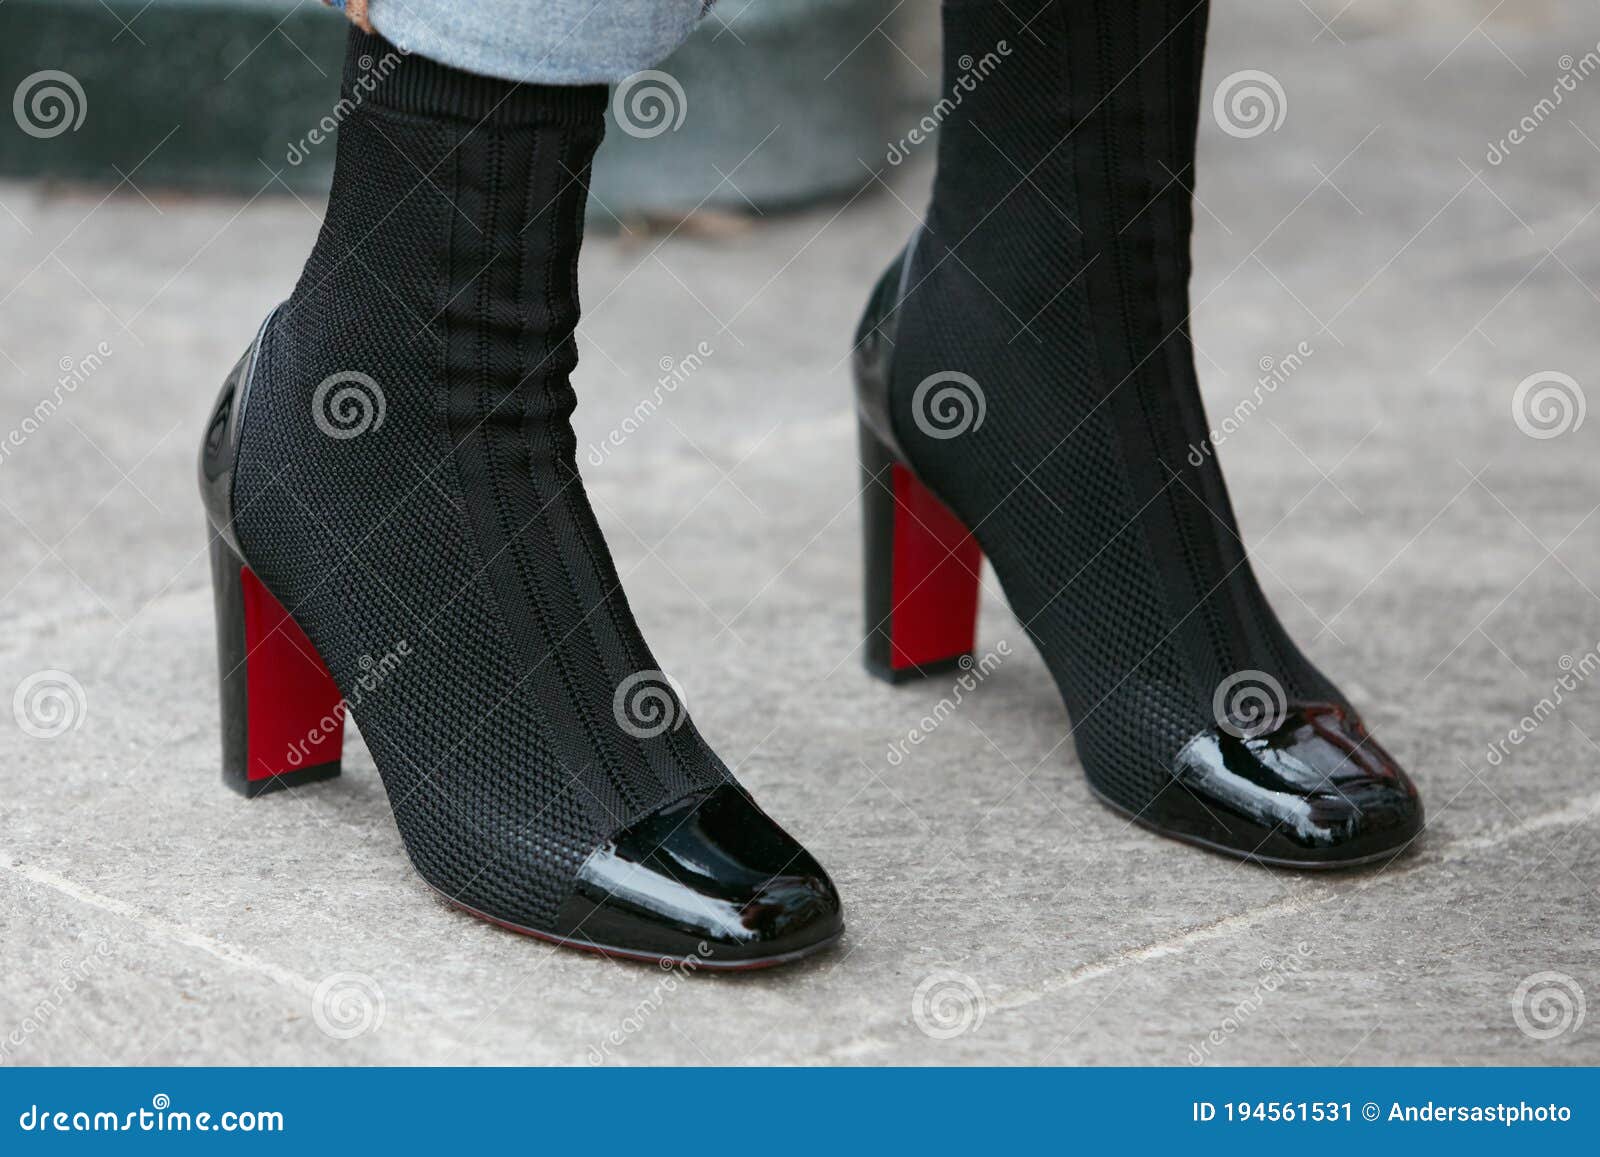 Woman with Black Boots with Red Heel before Giorgio Armani Fashion Show ...